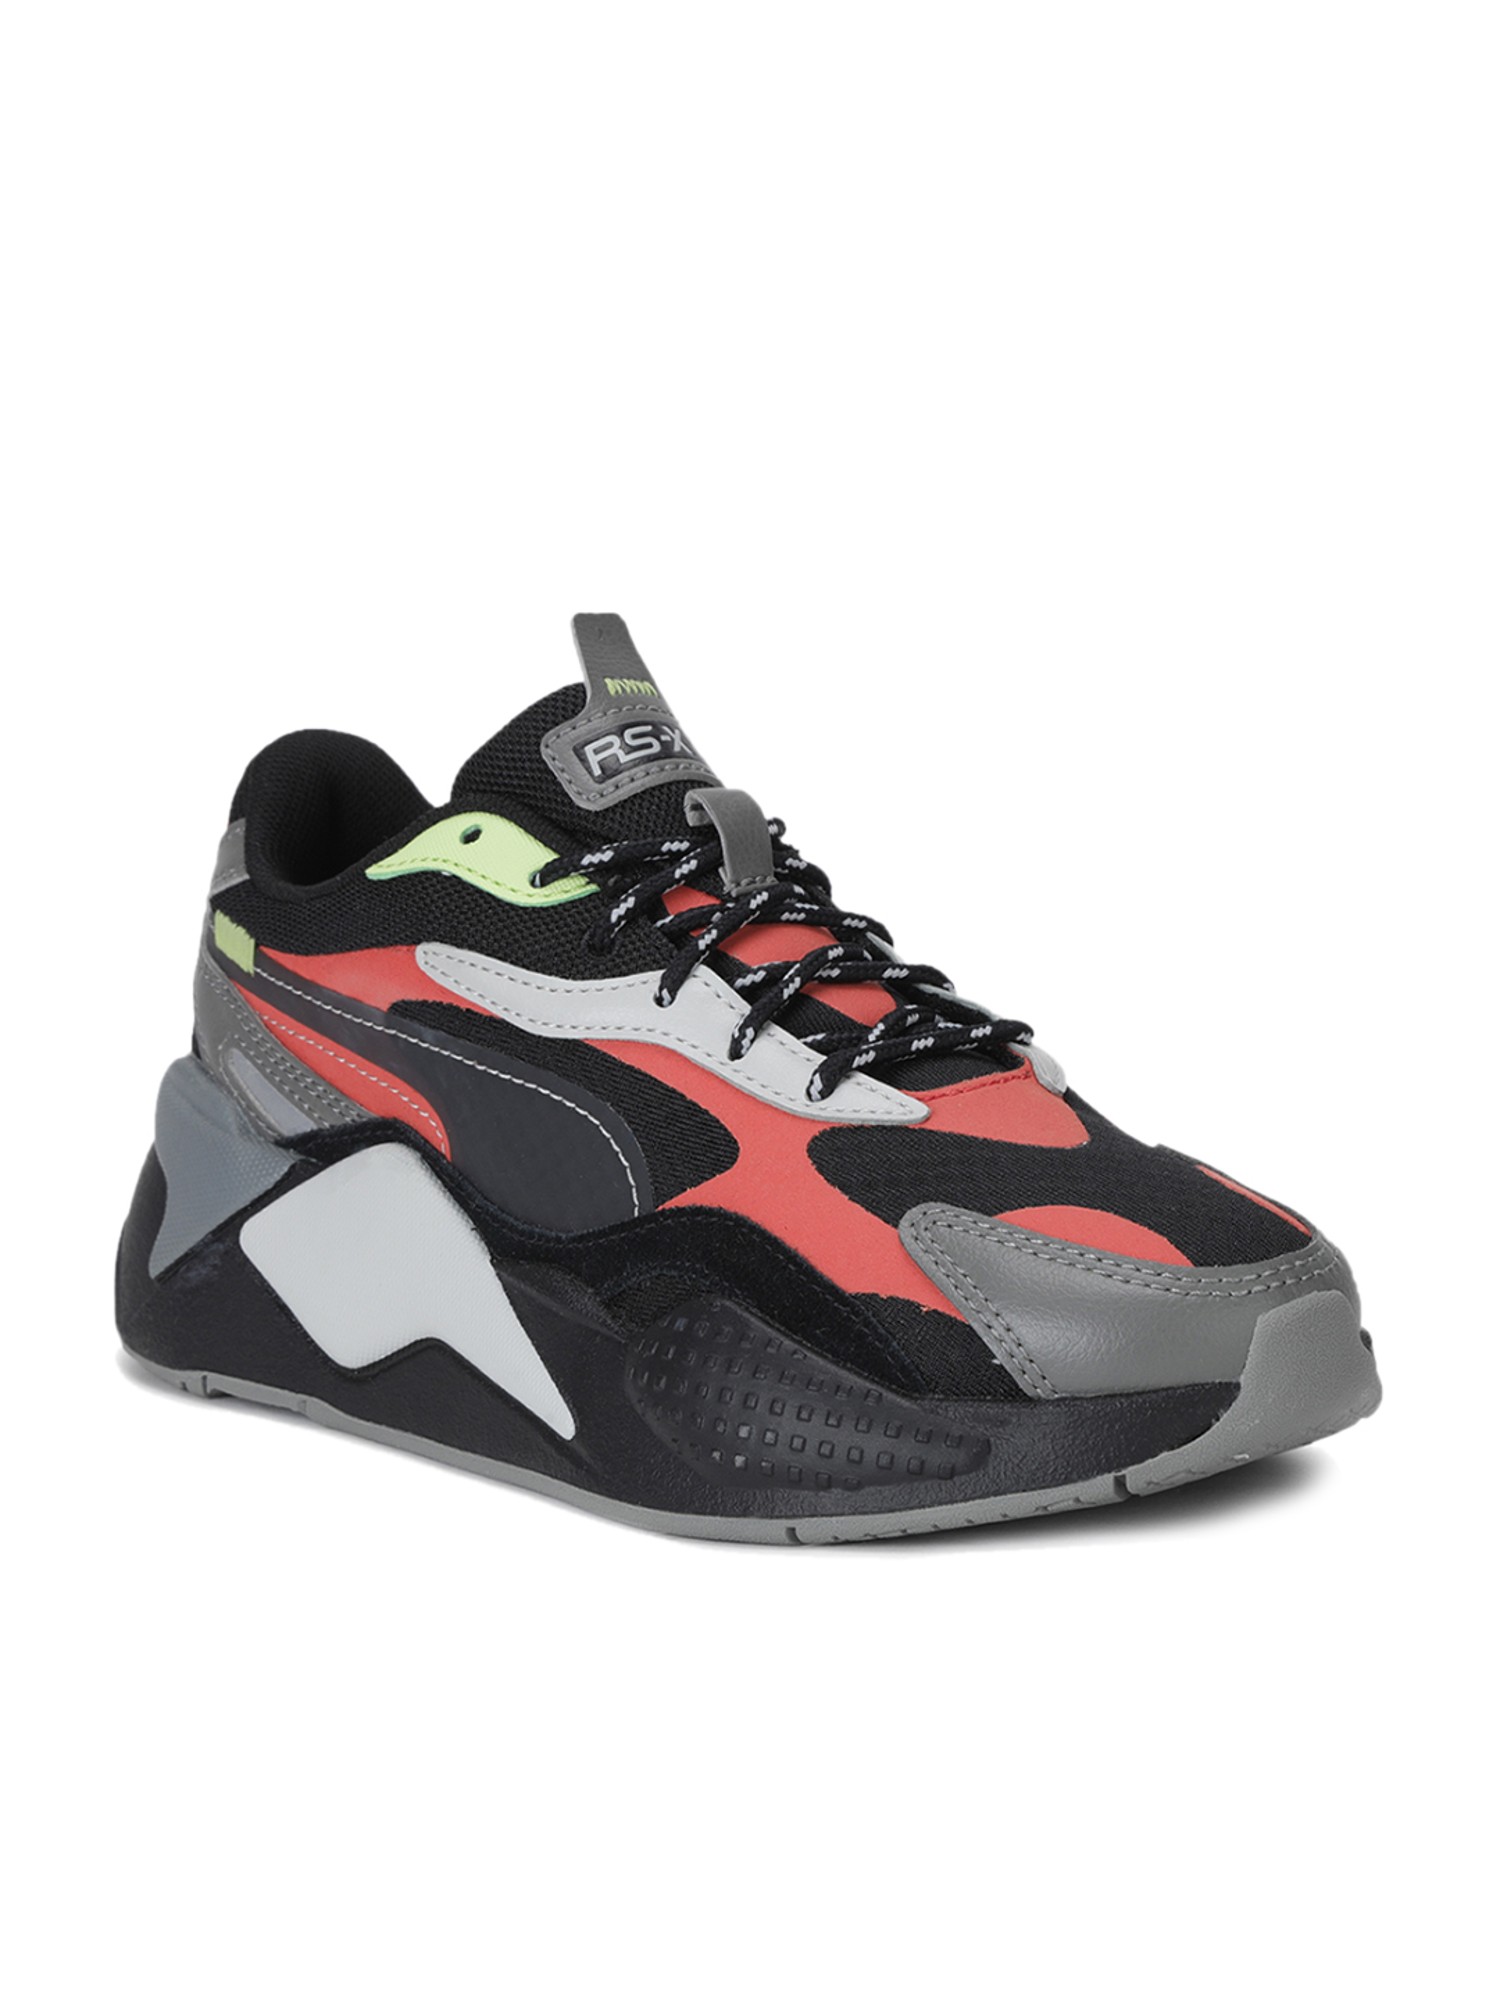 Geven Mortal Vlucht Buy Puma RS-X3 City Attack Jr Black Sneakers for Girls at Best Price @ Tata  CLiQ